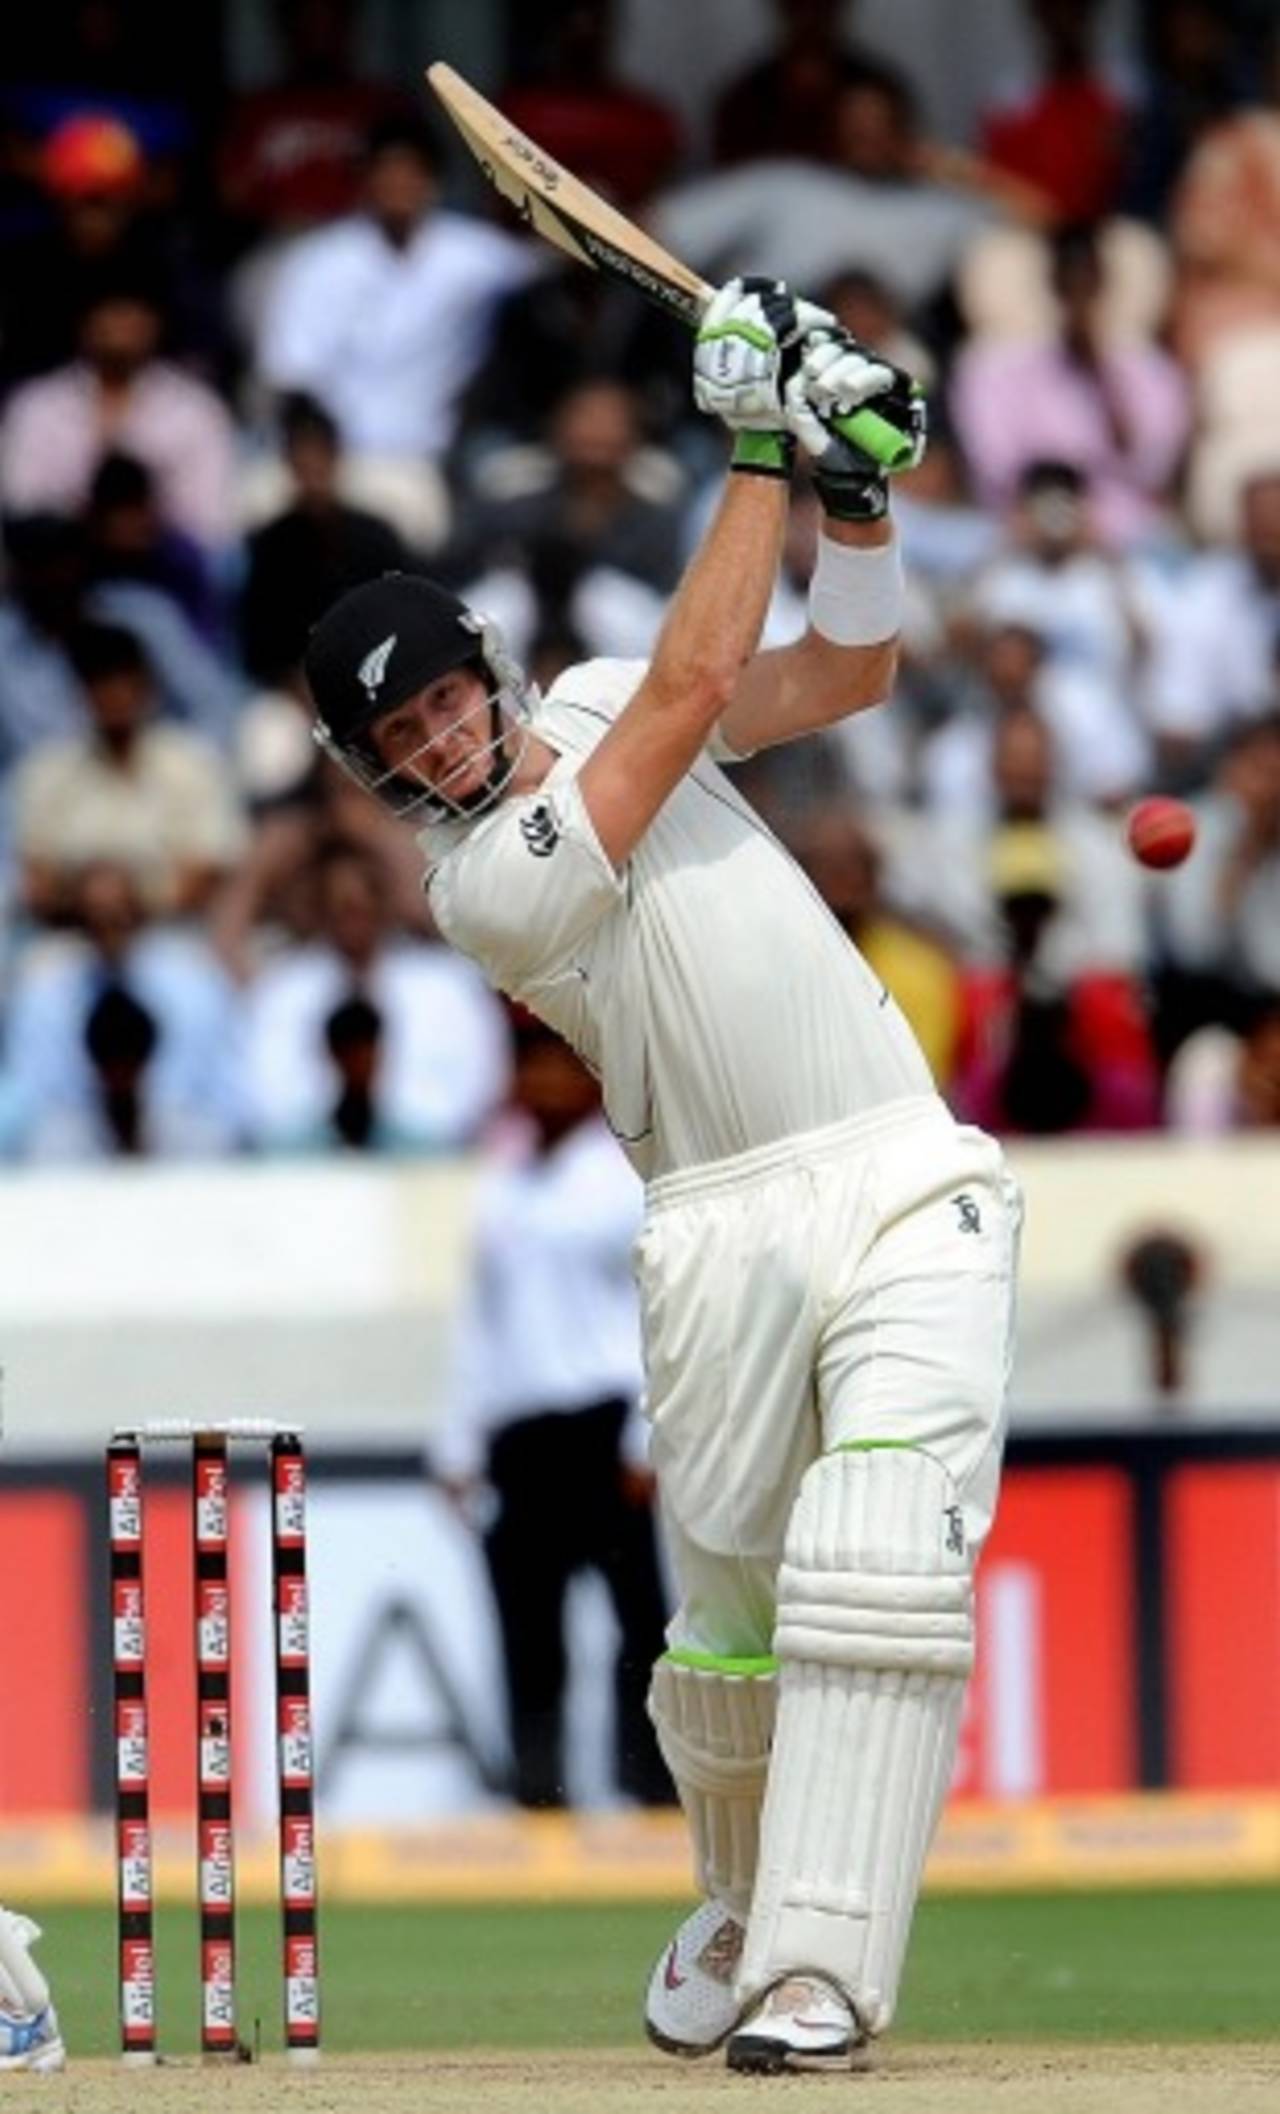 Martin Guptill tries to go over the top, India v New Zealand, 2nd Test, Hyderaabad, 1st day, November 12, 2010